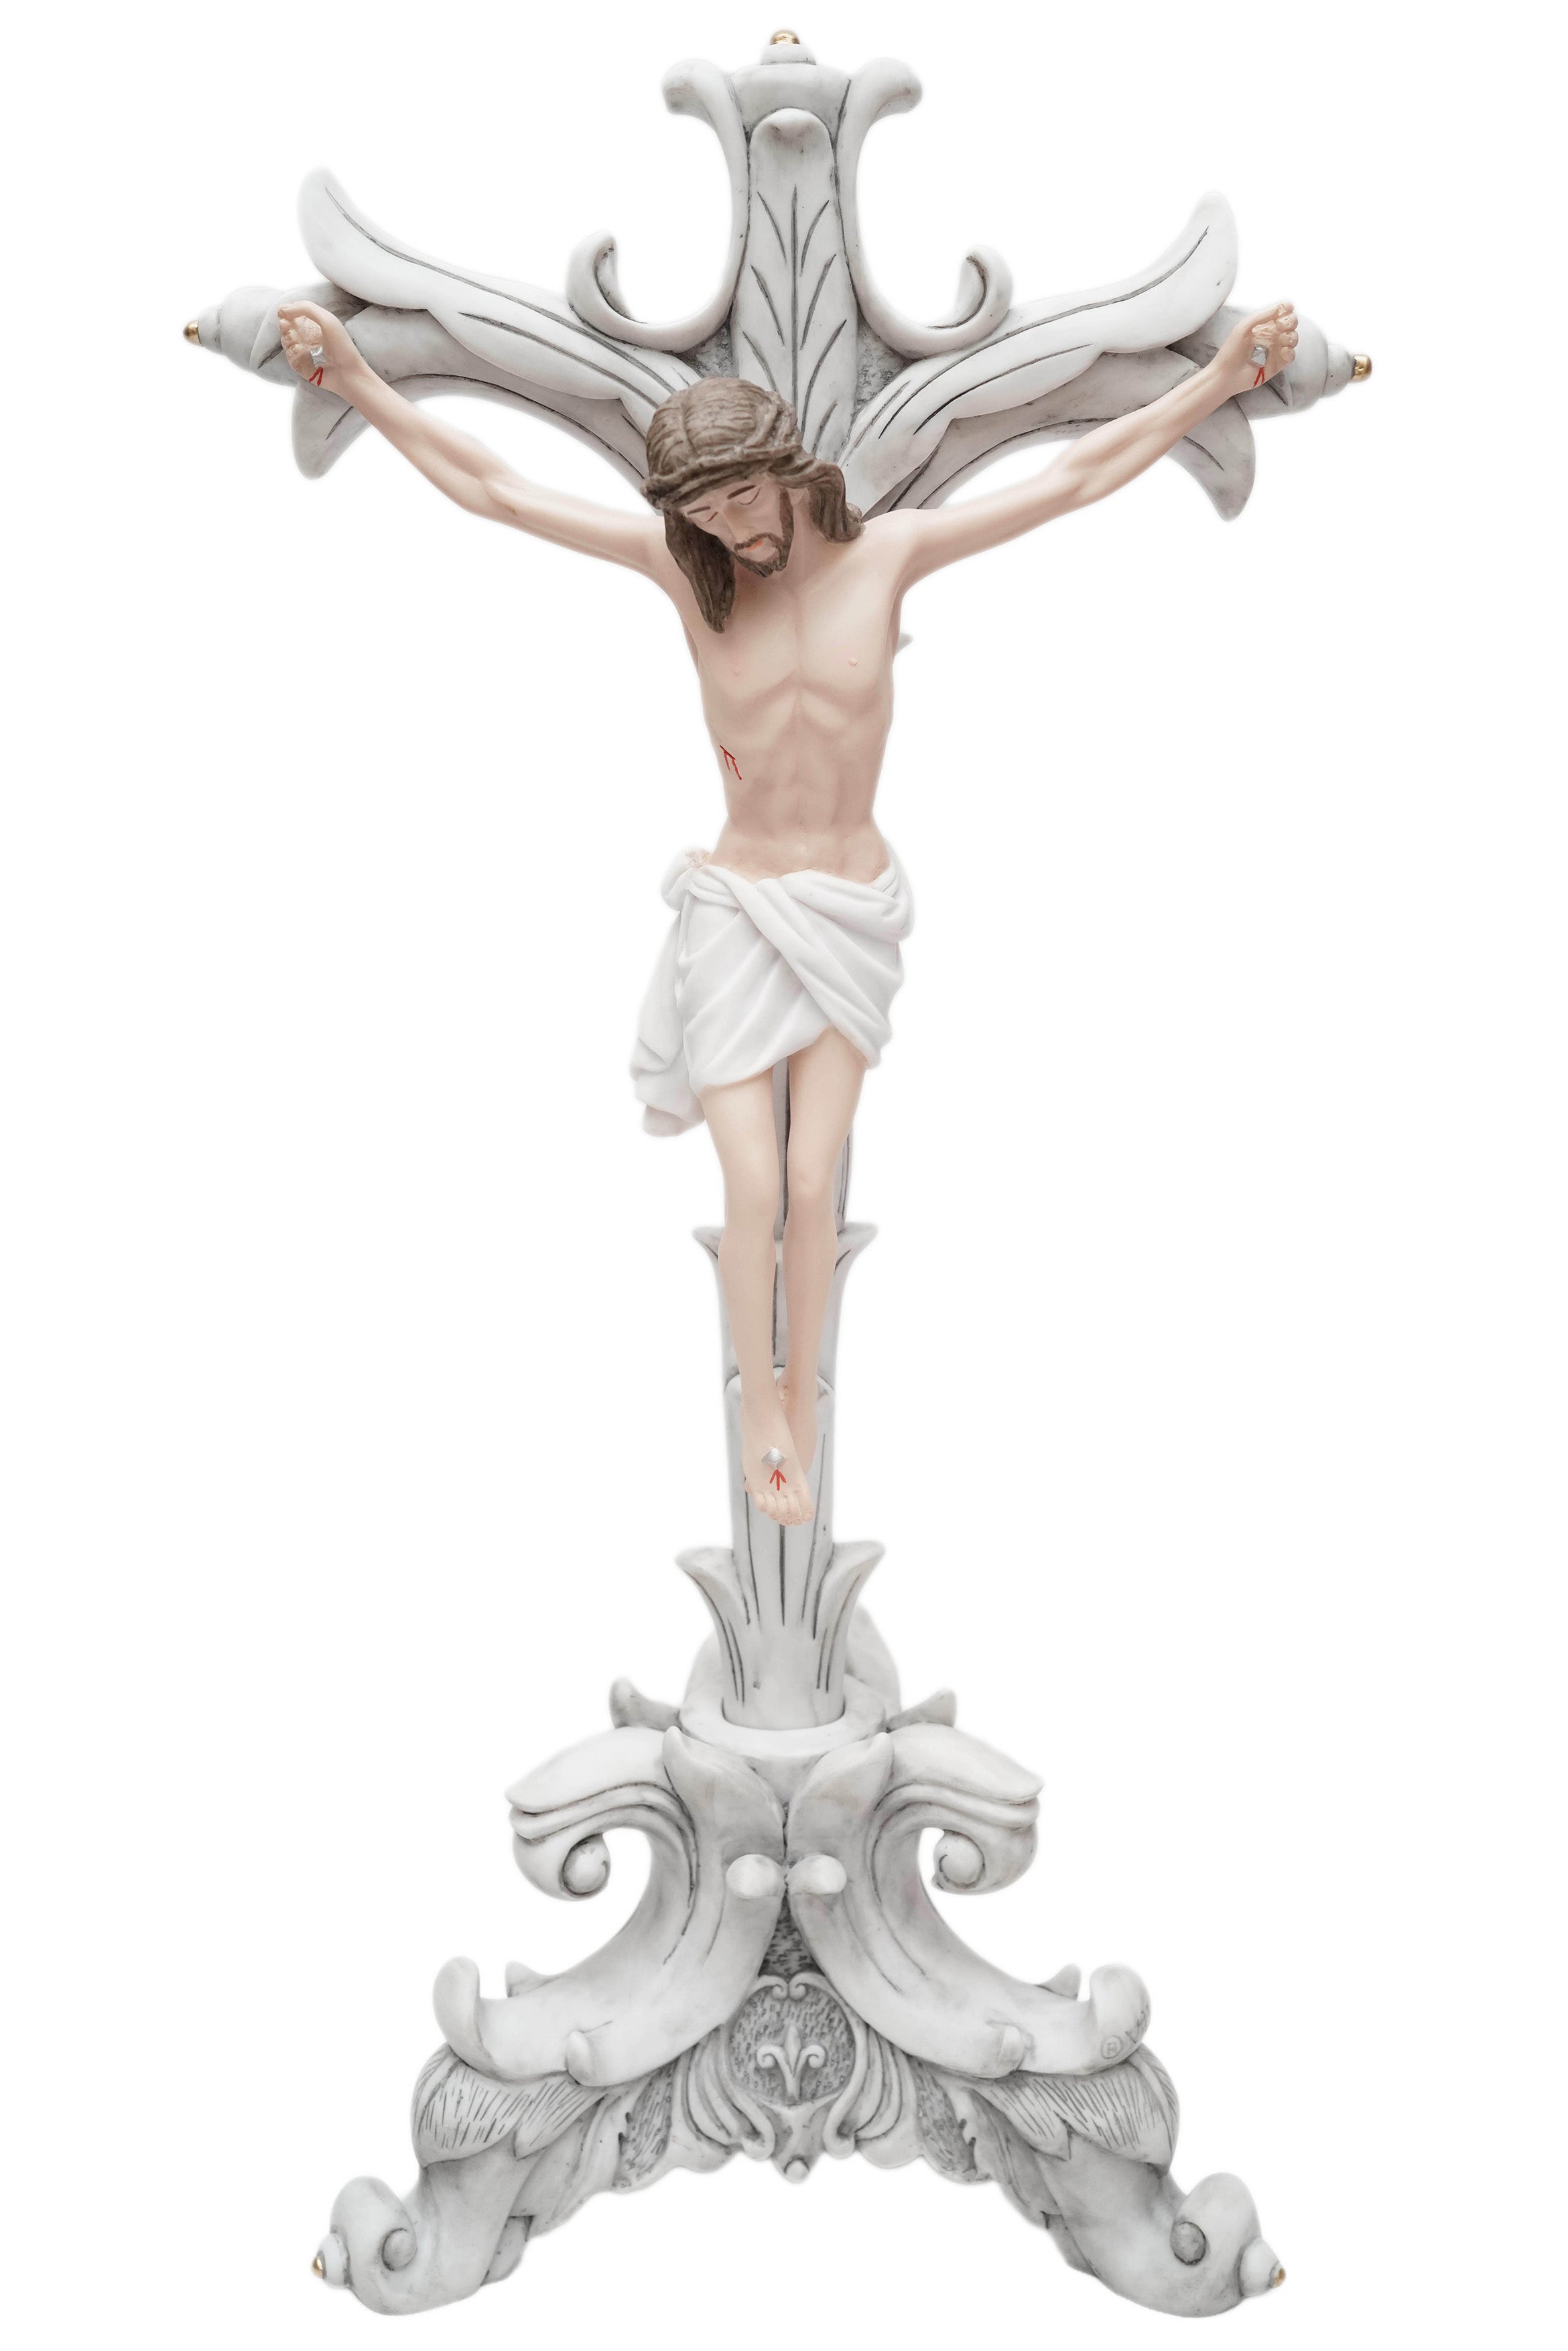 21.5" Crucifixion Crucifix of Jesus on the Cross with Base Statue Catholic Religiuos Vittoria Collection Made in Italy Home Decoration